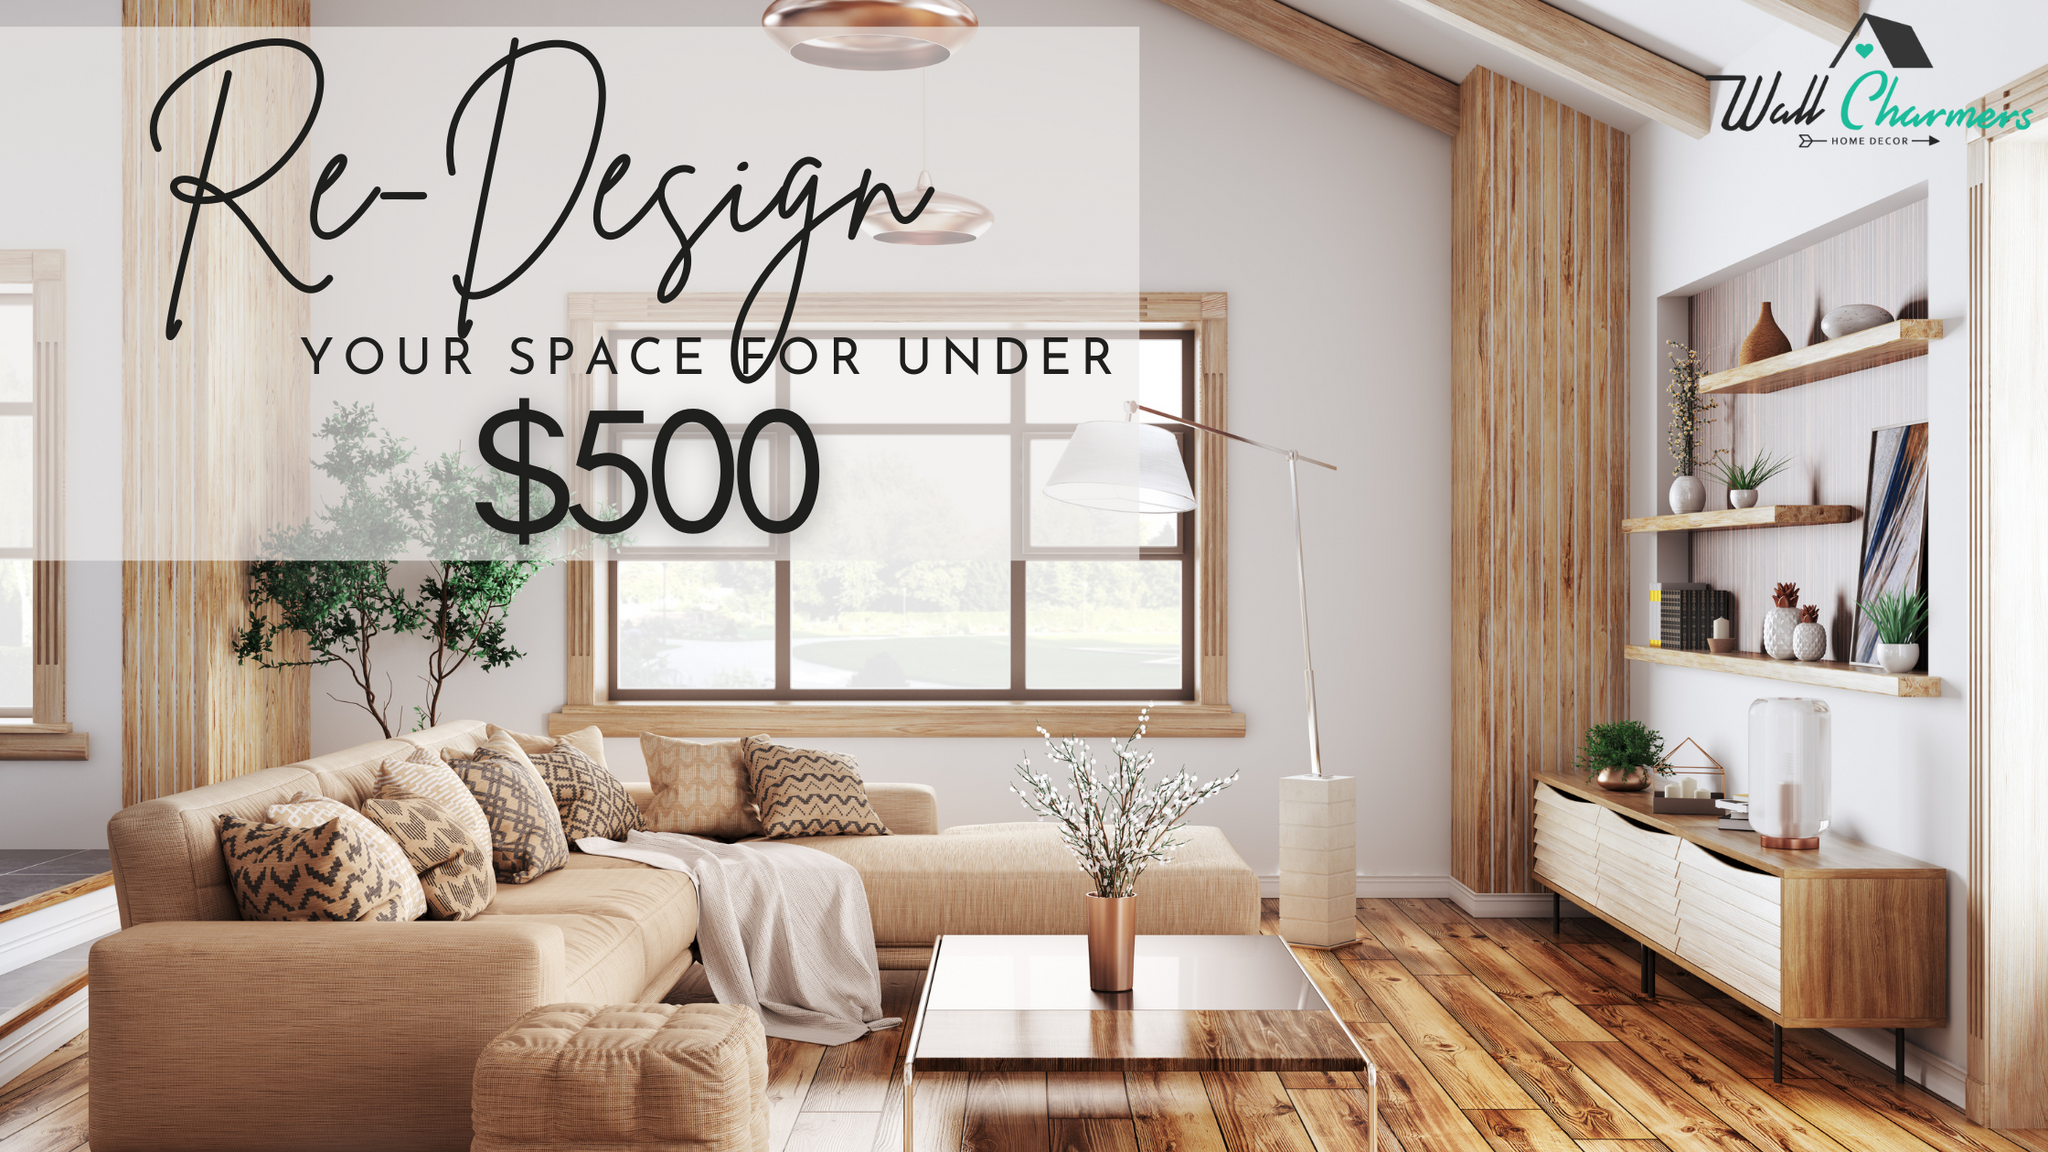 Re-Design your Space for Under $500